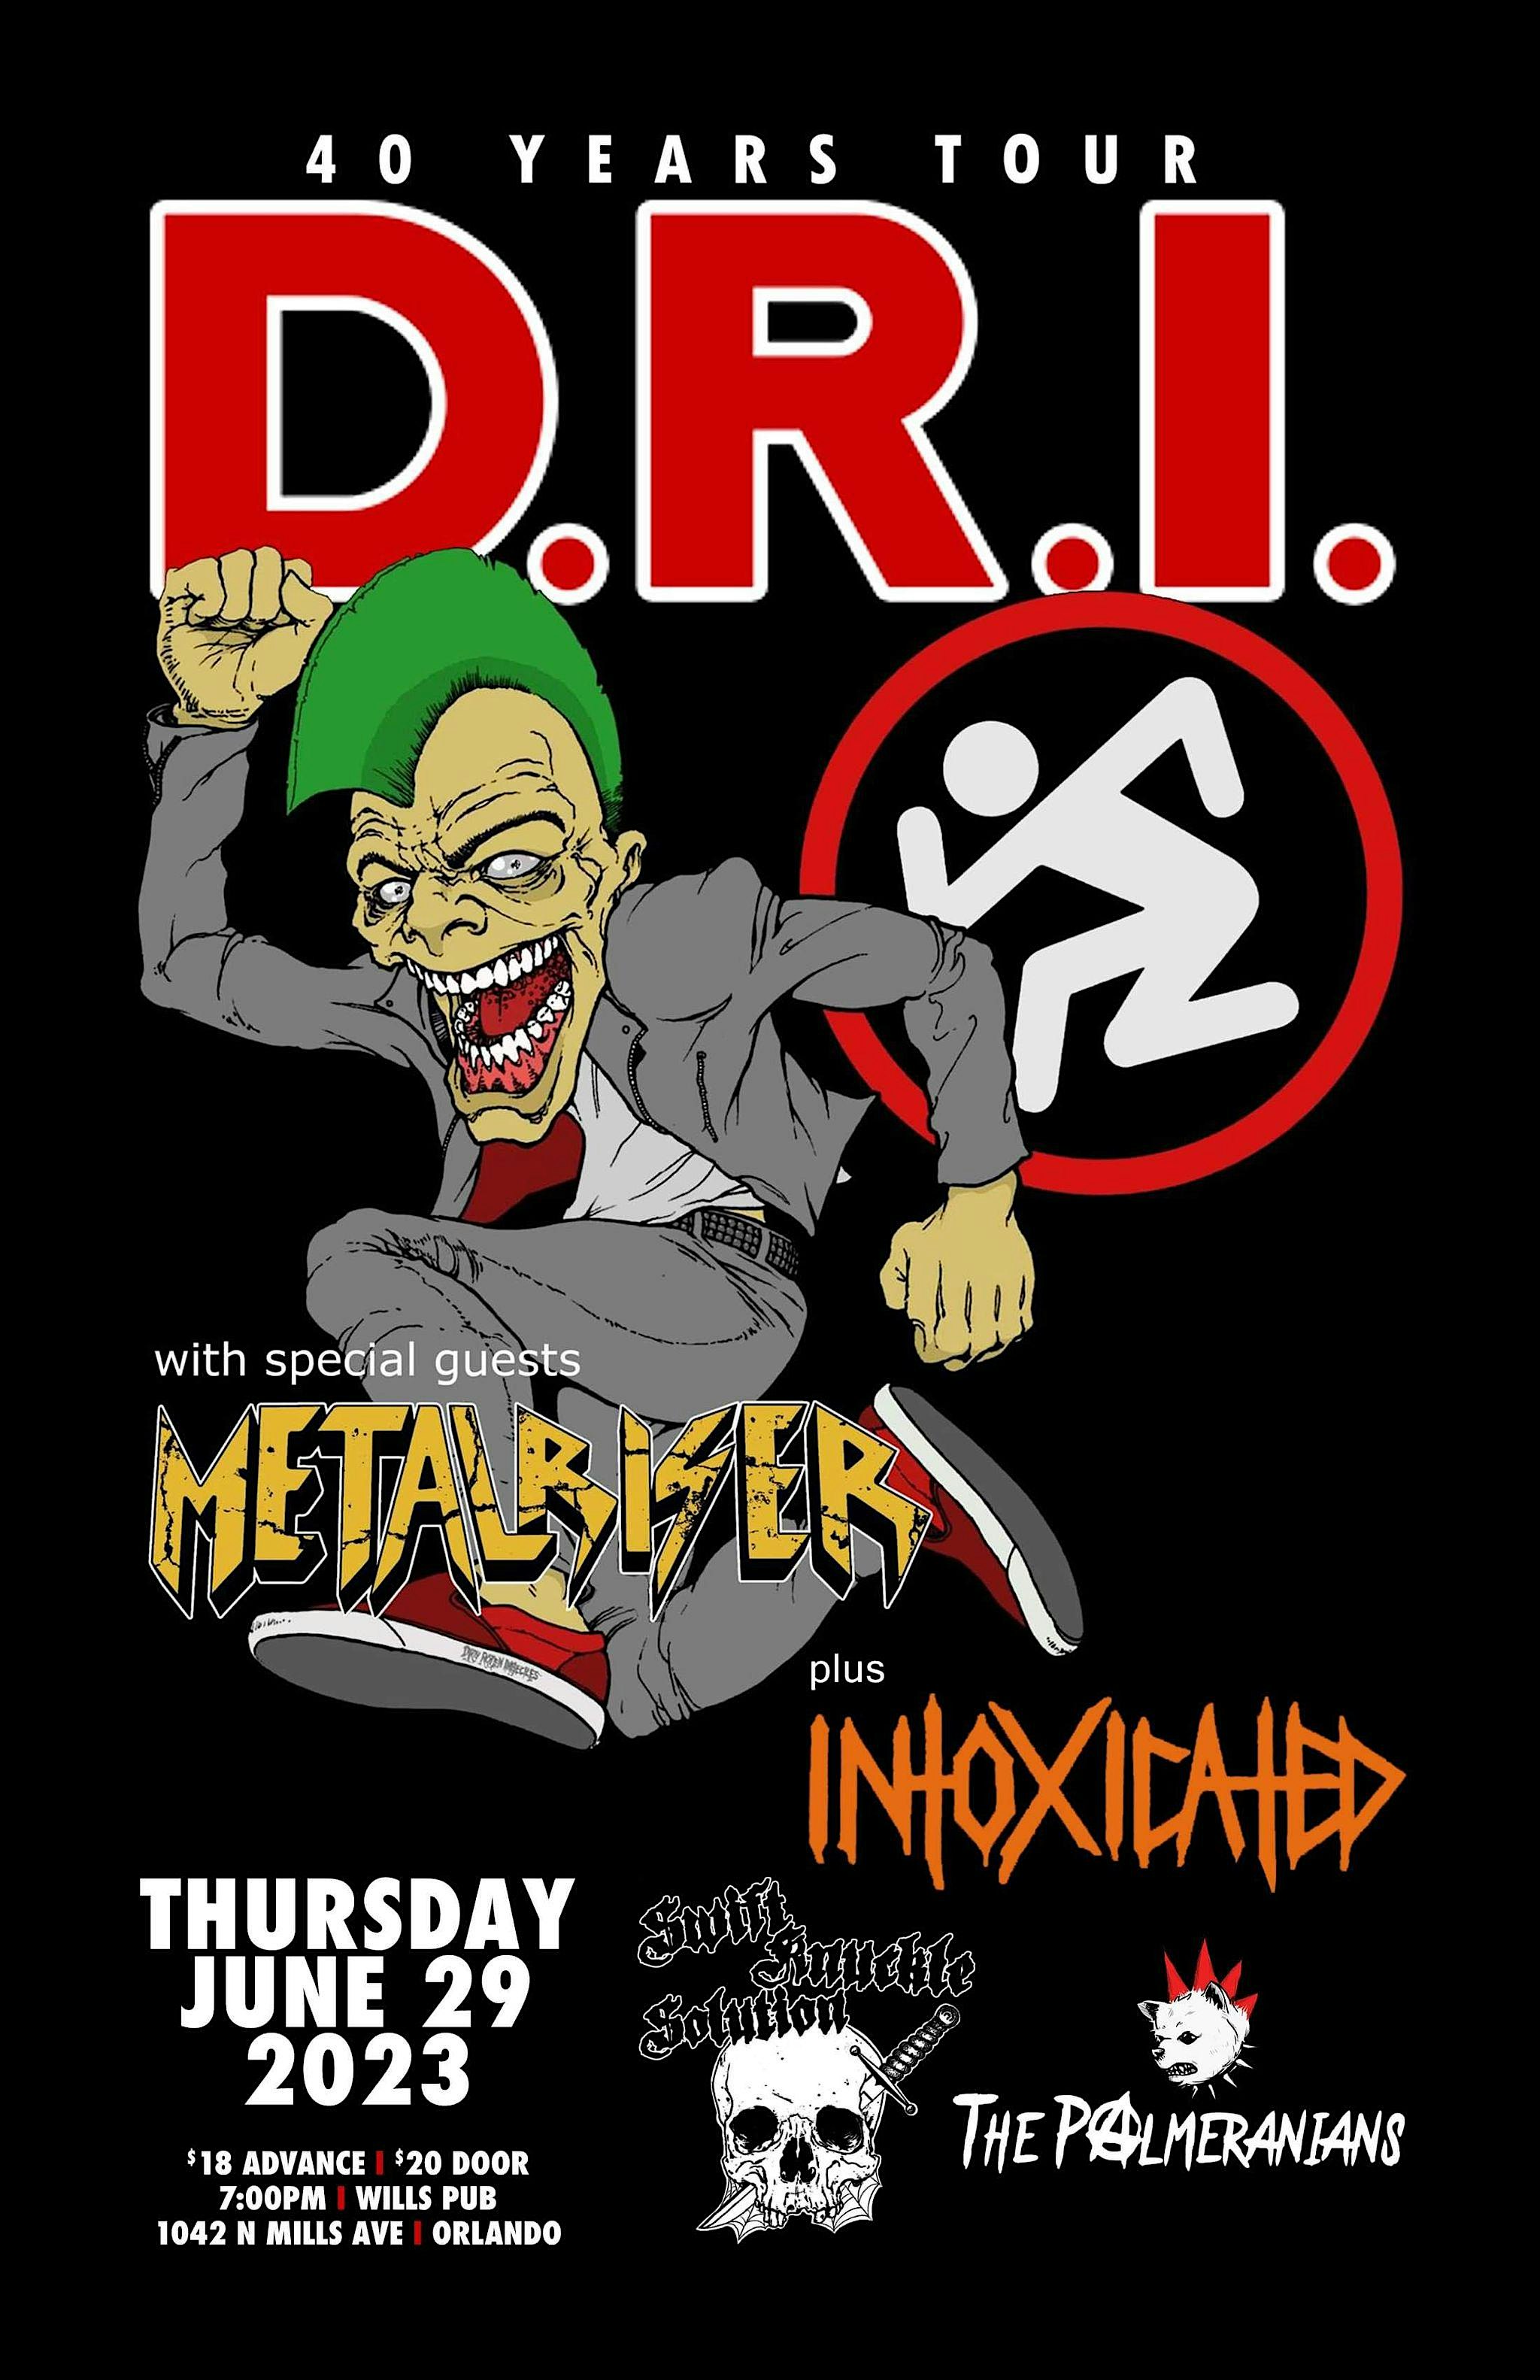 D.R.I., Metalriser, Intoxicatd, Swift Knuckle Solution, and The Palmeranians in Orlando at Will's Pub